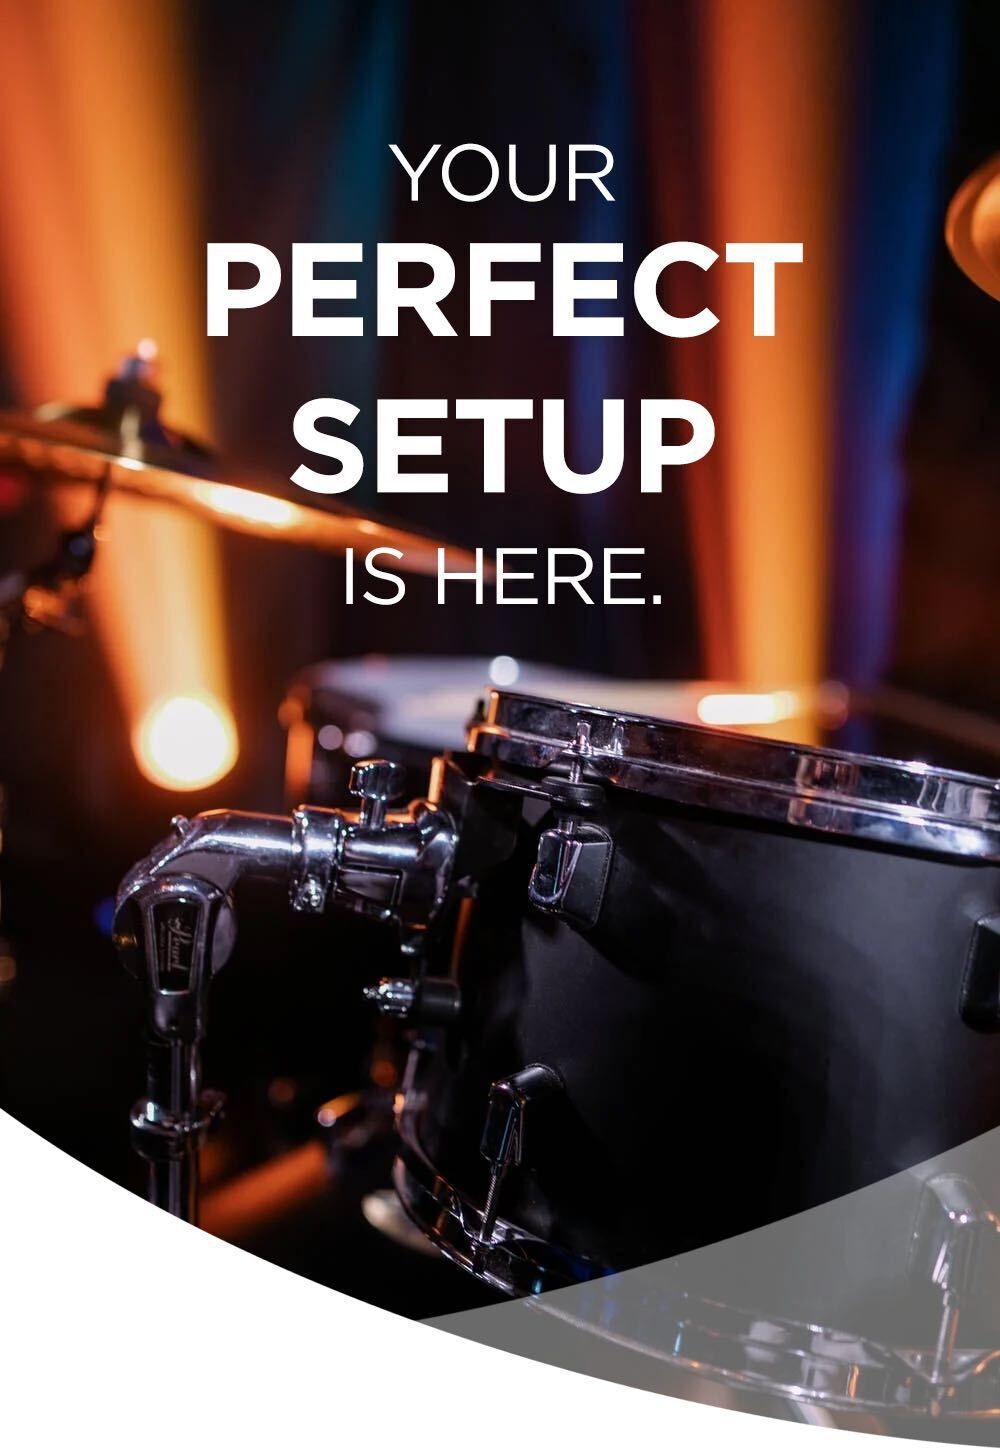 YOUR PERFECT SETUP IS HERE.